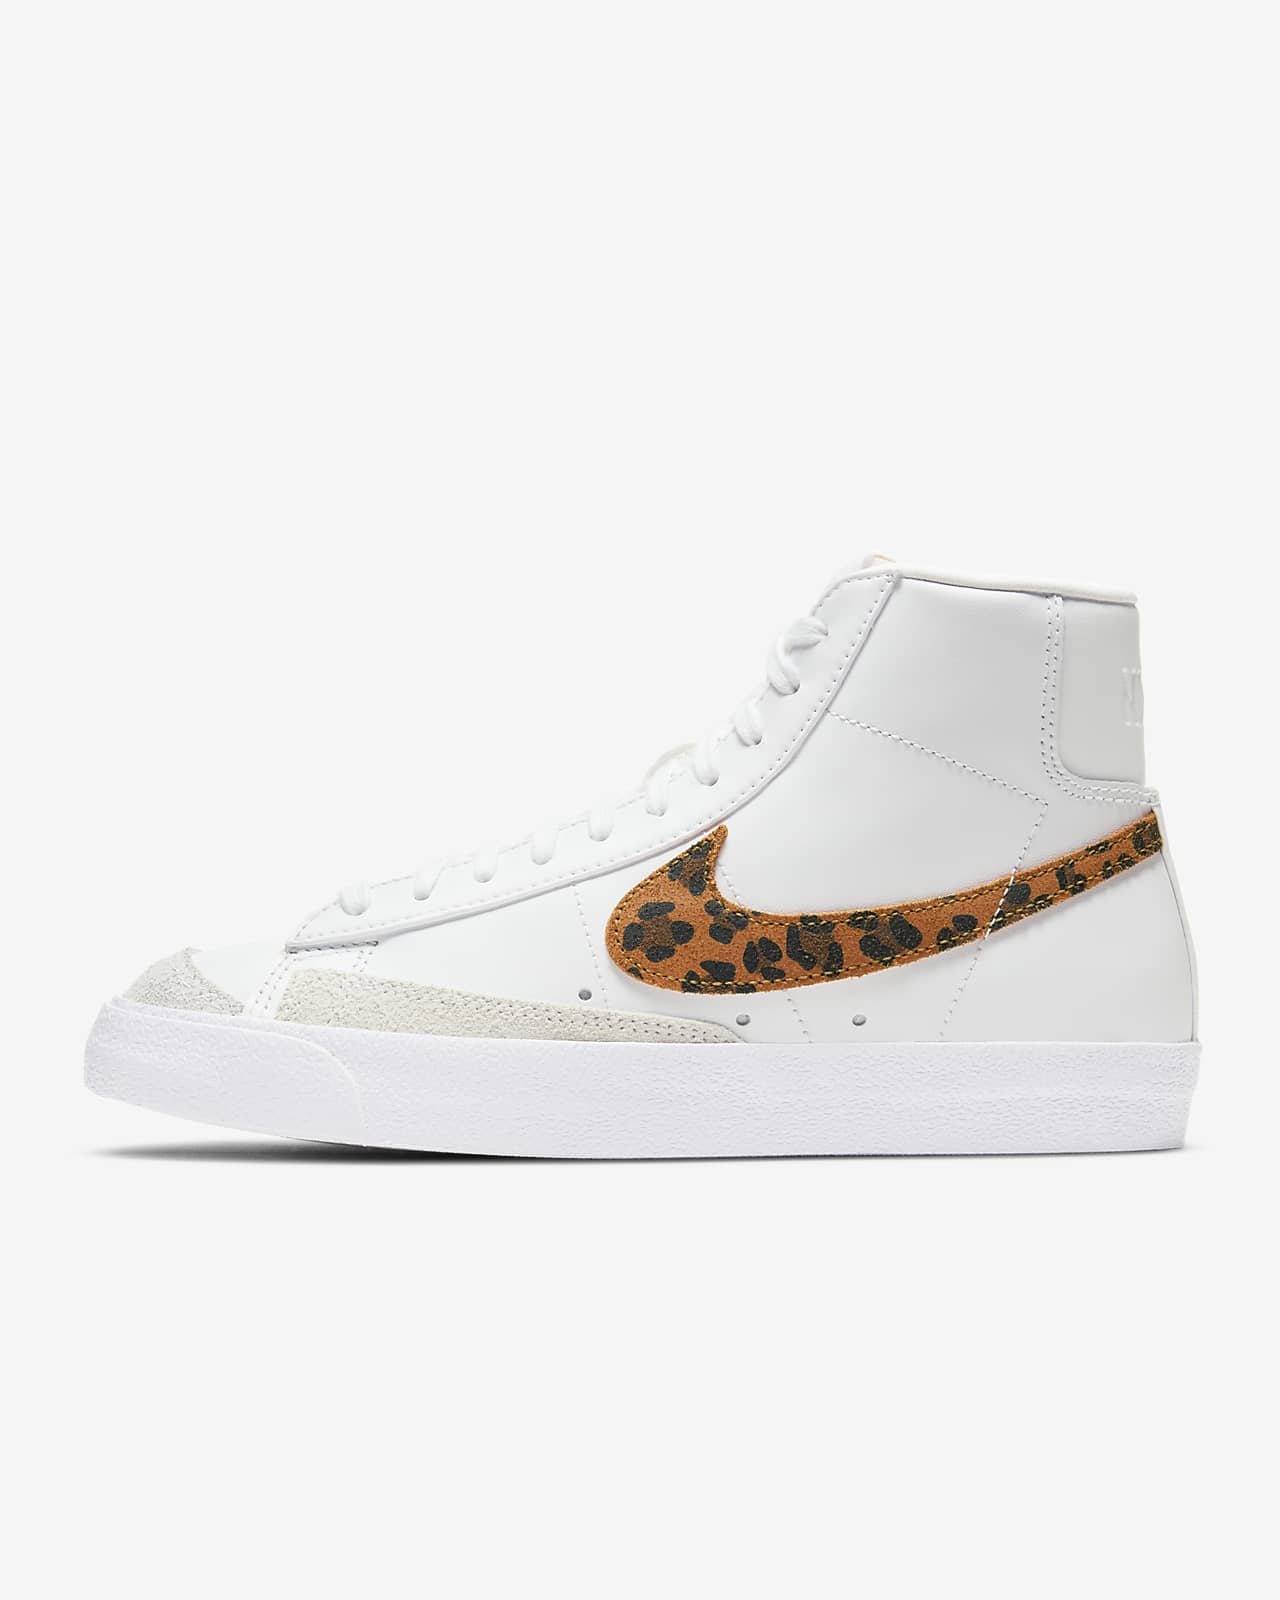 nike blazer 77 sneakers in white and yellow